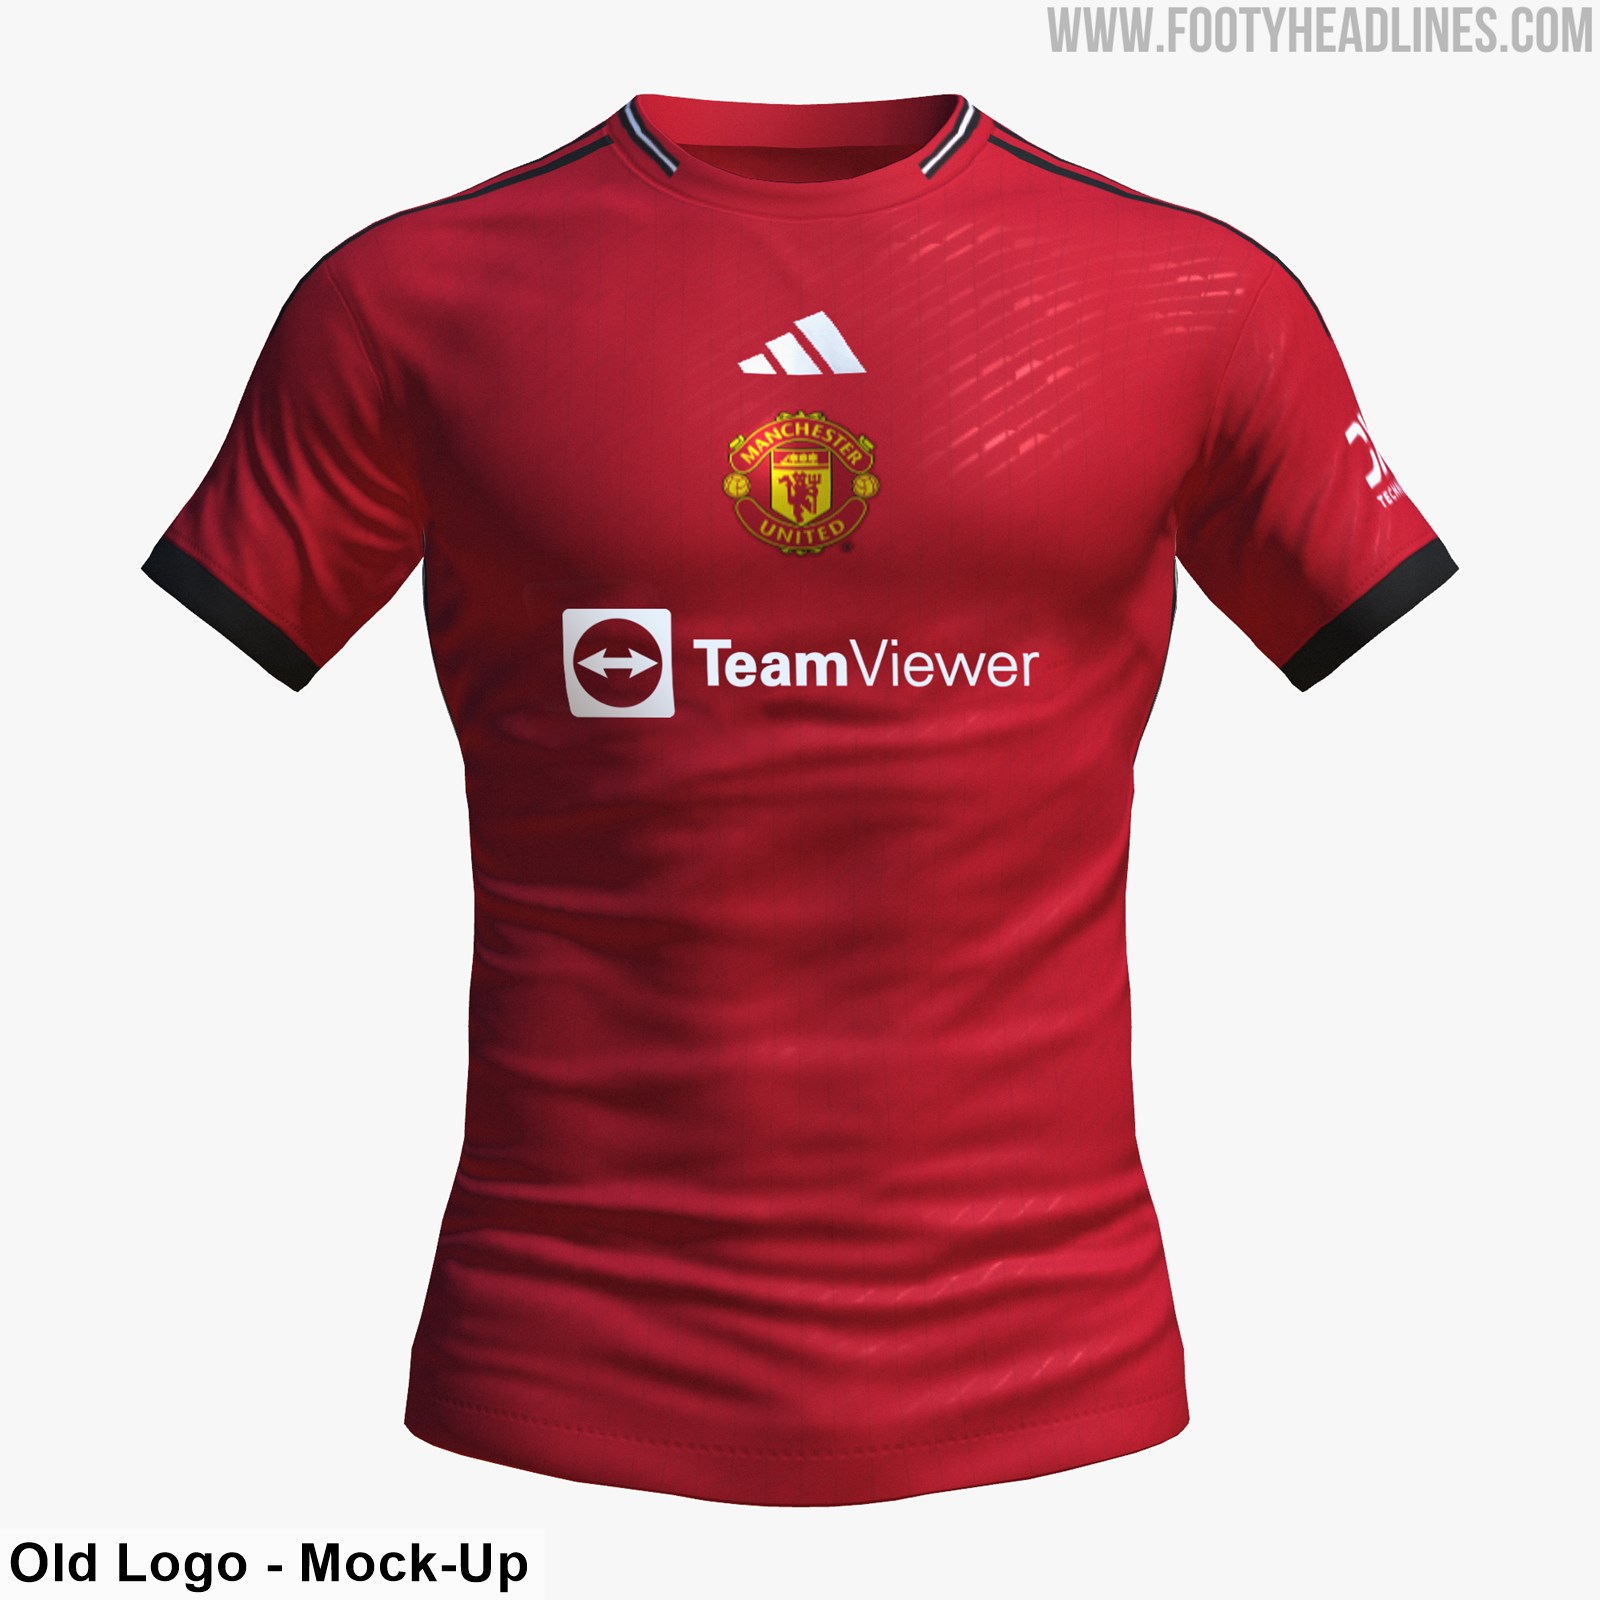 Exclusive: Manchester United (Still) Main Sponsor Minorly Update ...